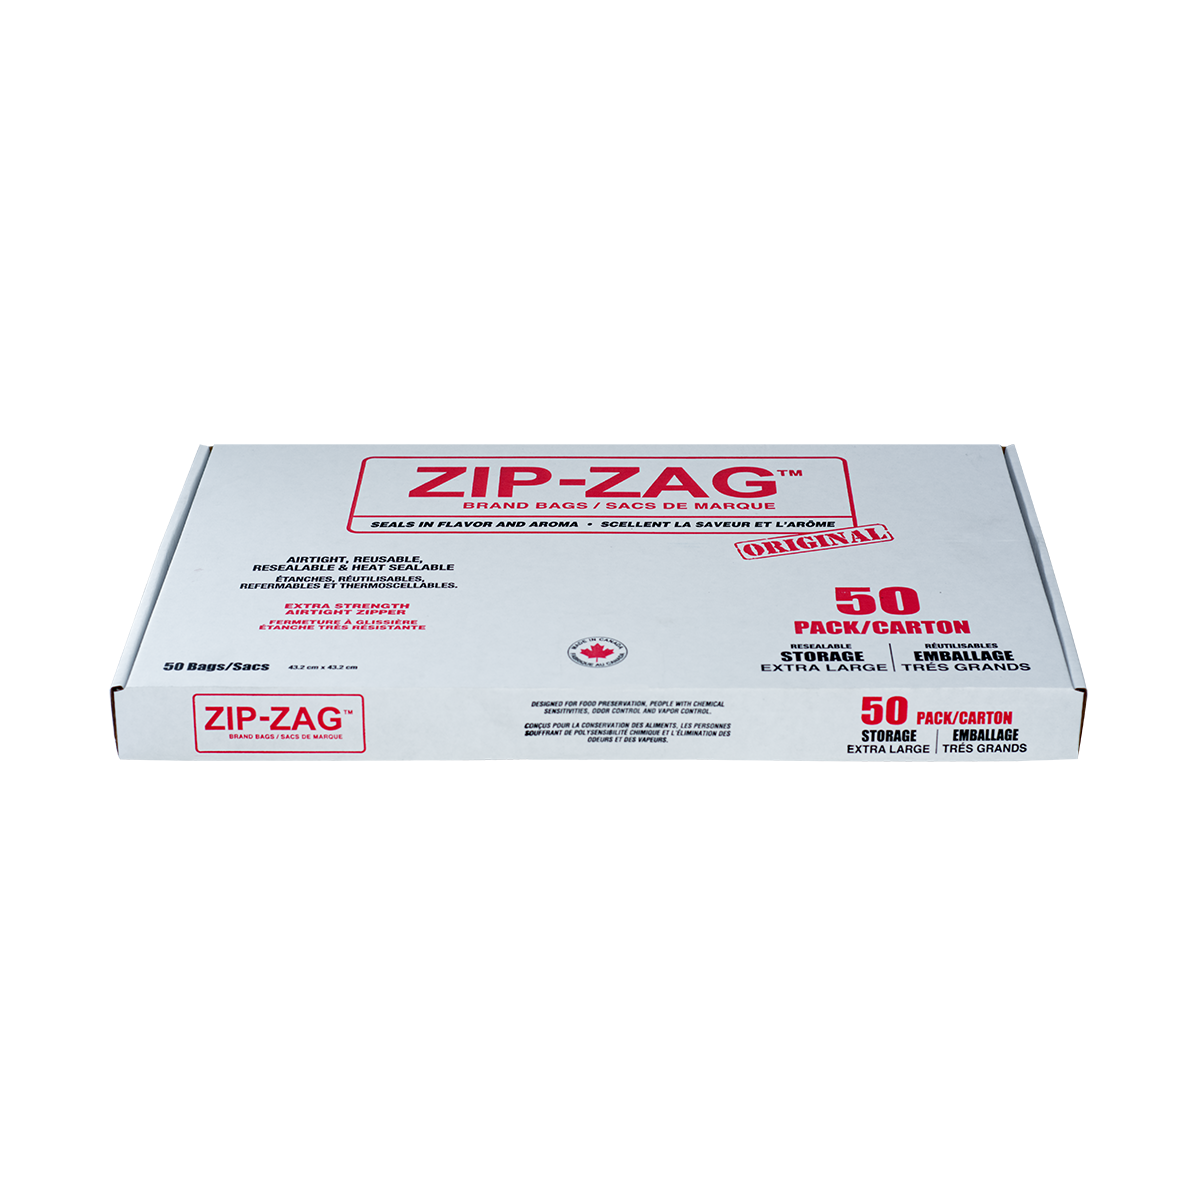 Large Zip Zag Bags - 10 Pack  HTG Supply Hydroponics & Grow Lights